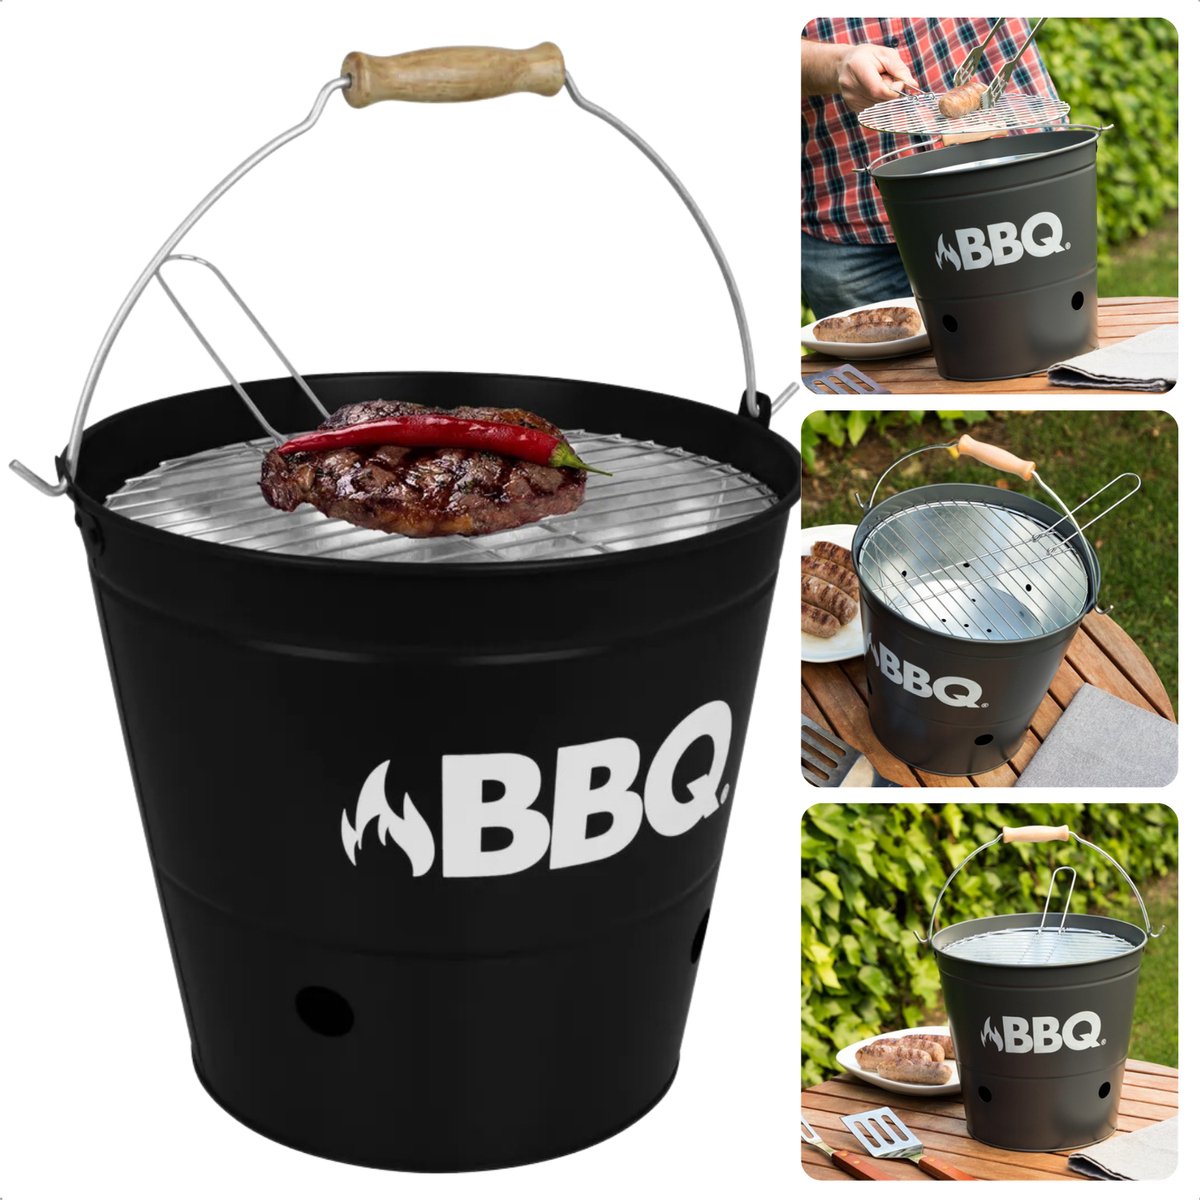 Cheqo® Draagbare Houtskoolbarbecue - Barbecue - BBQ - Camping Barbecue - Grill - BBQ Emmer